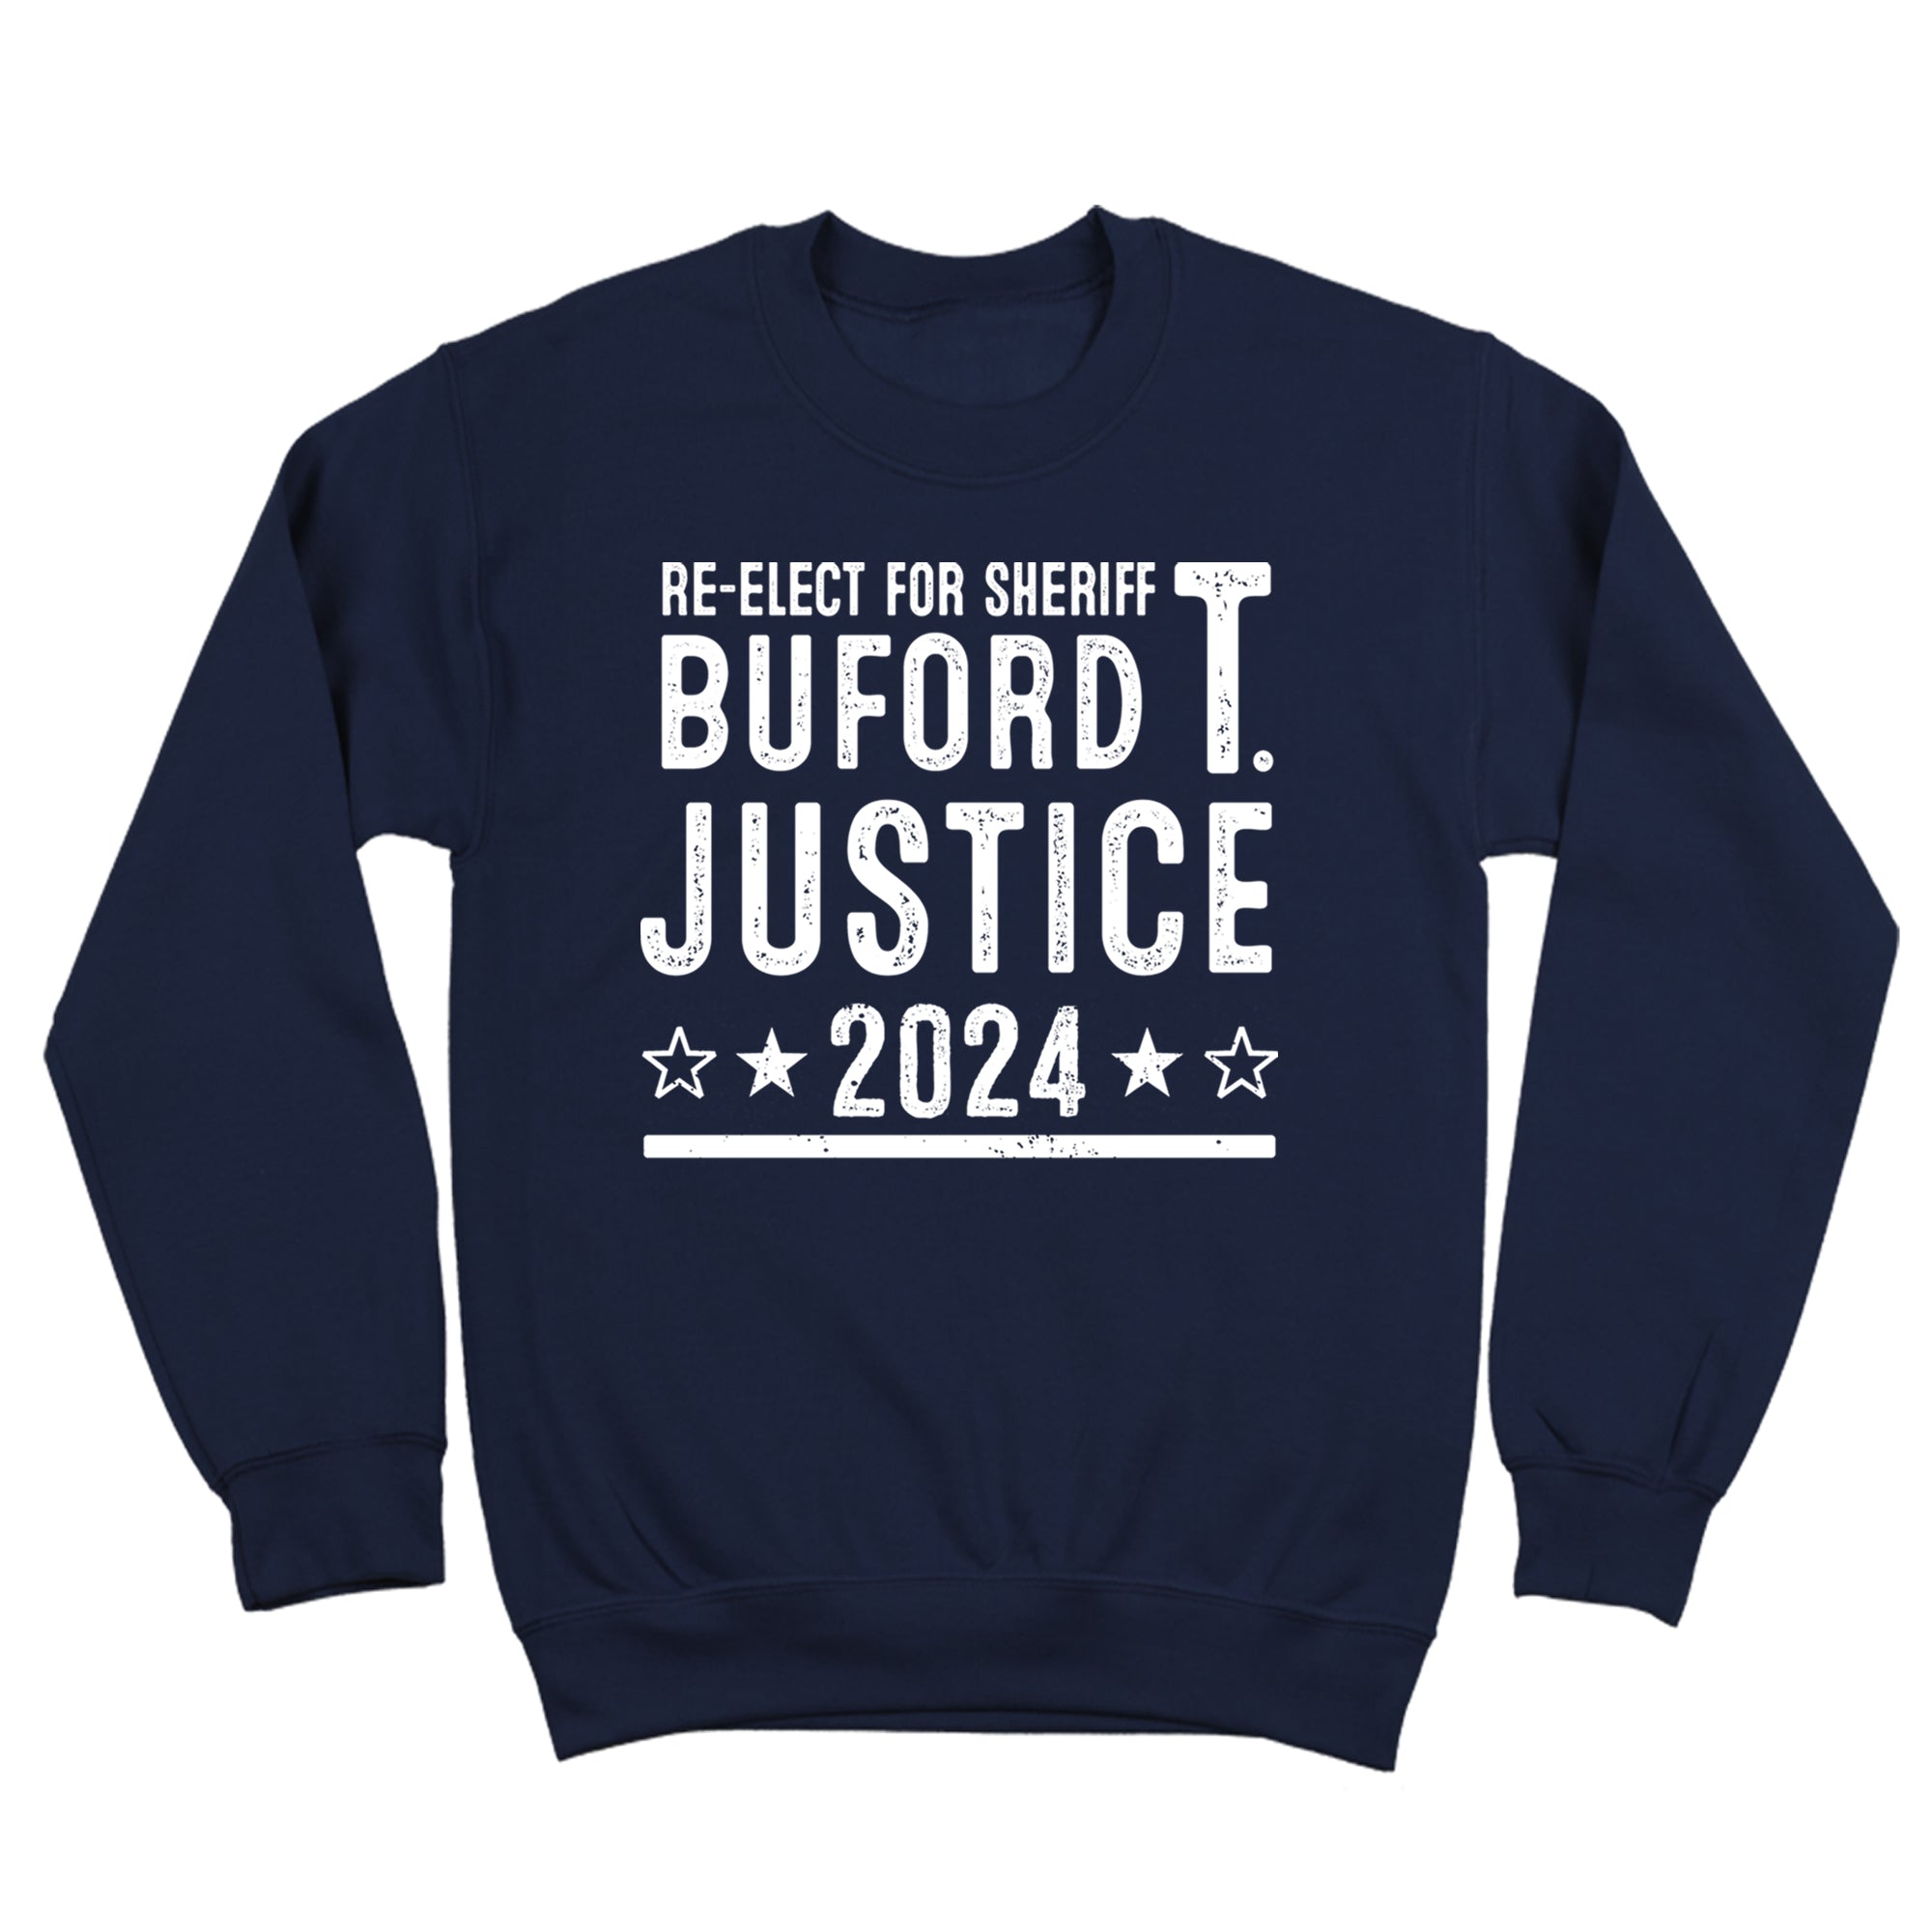 Buford T Justice 2024 Election Tshirt - Donkey Tees